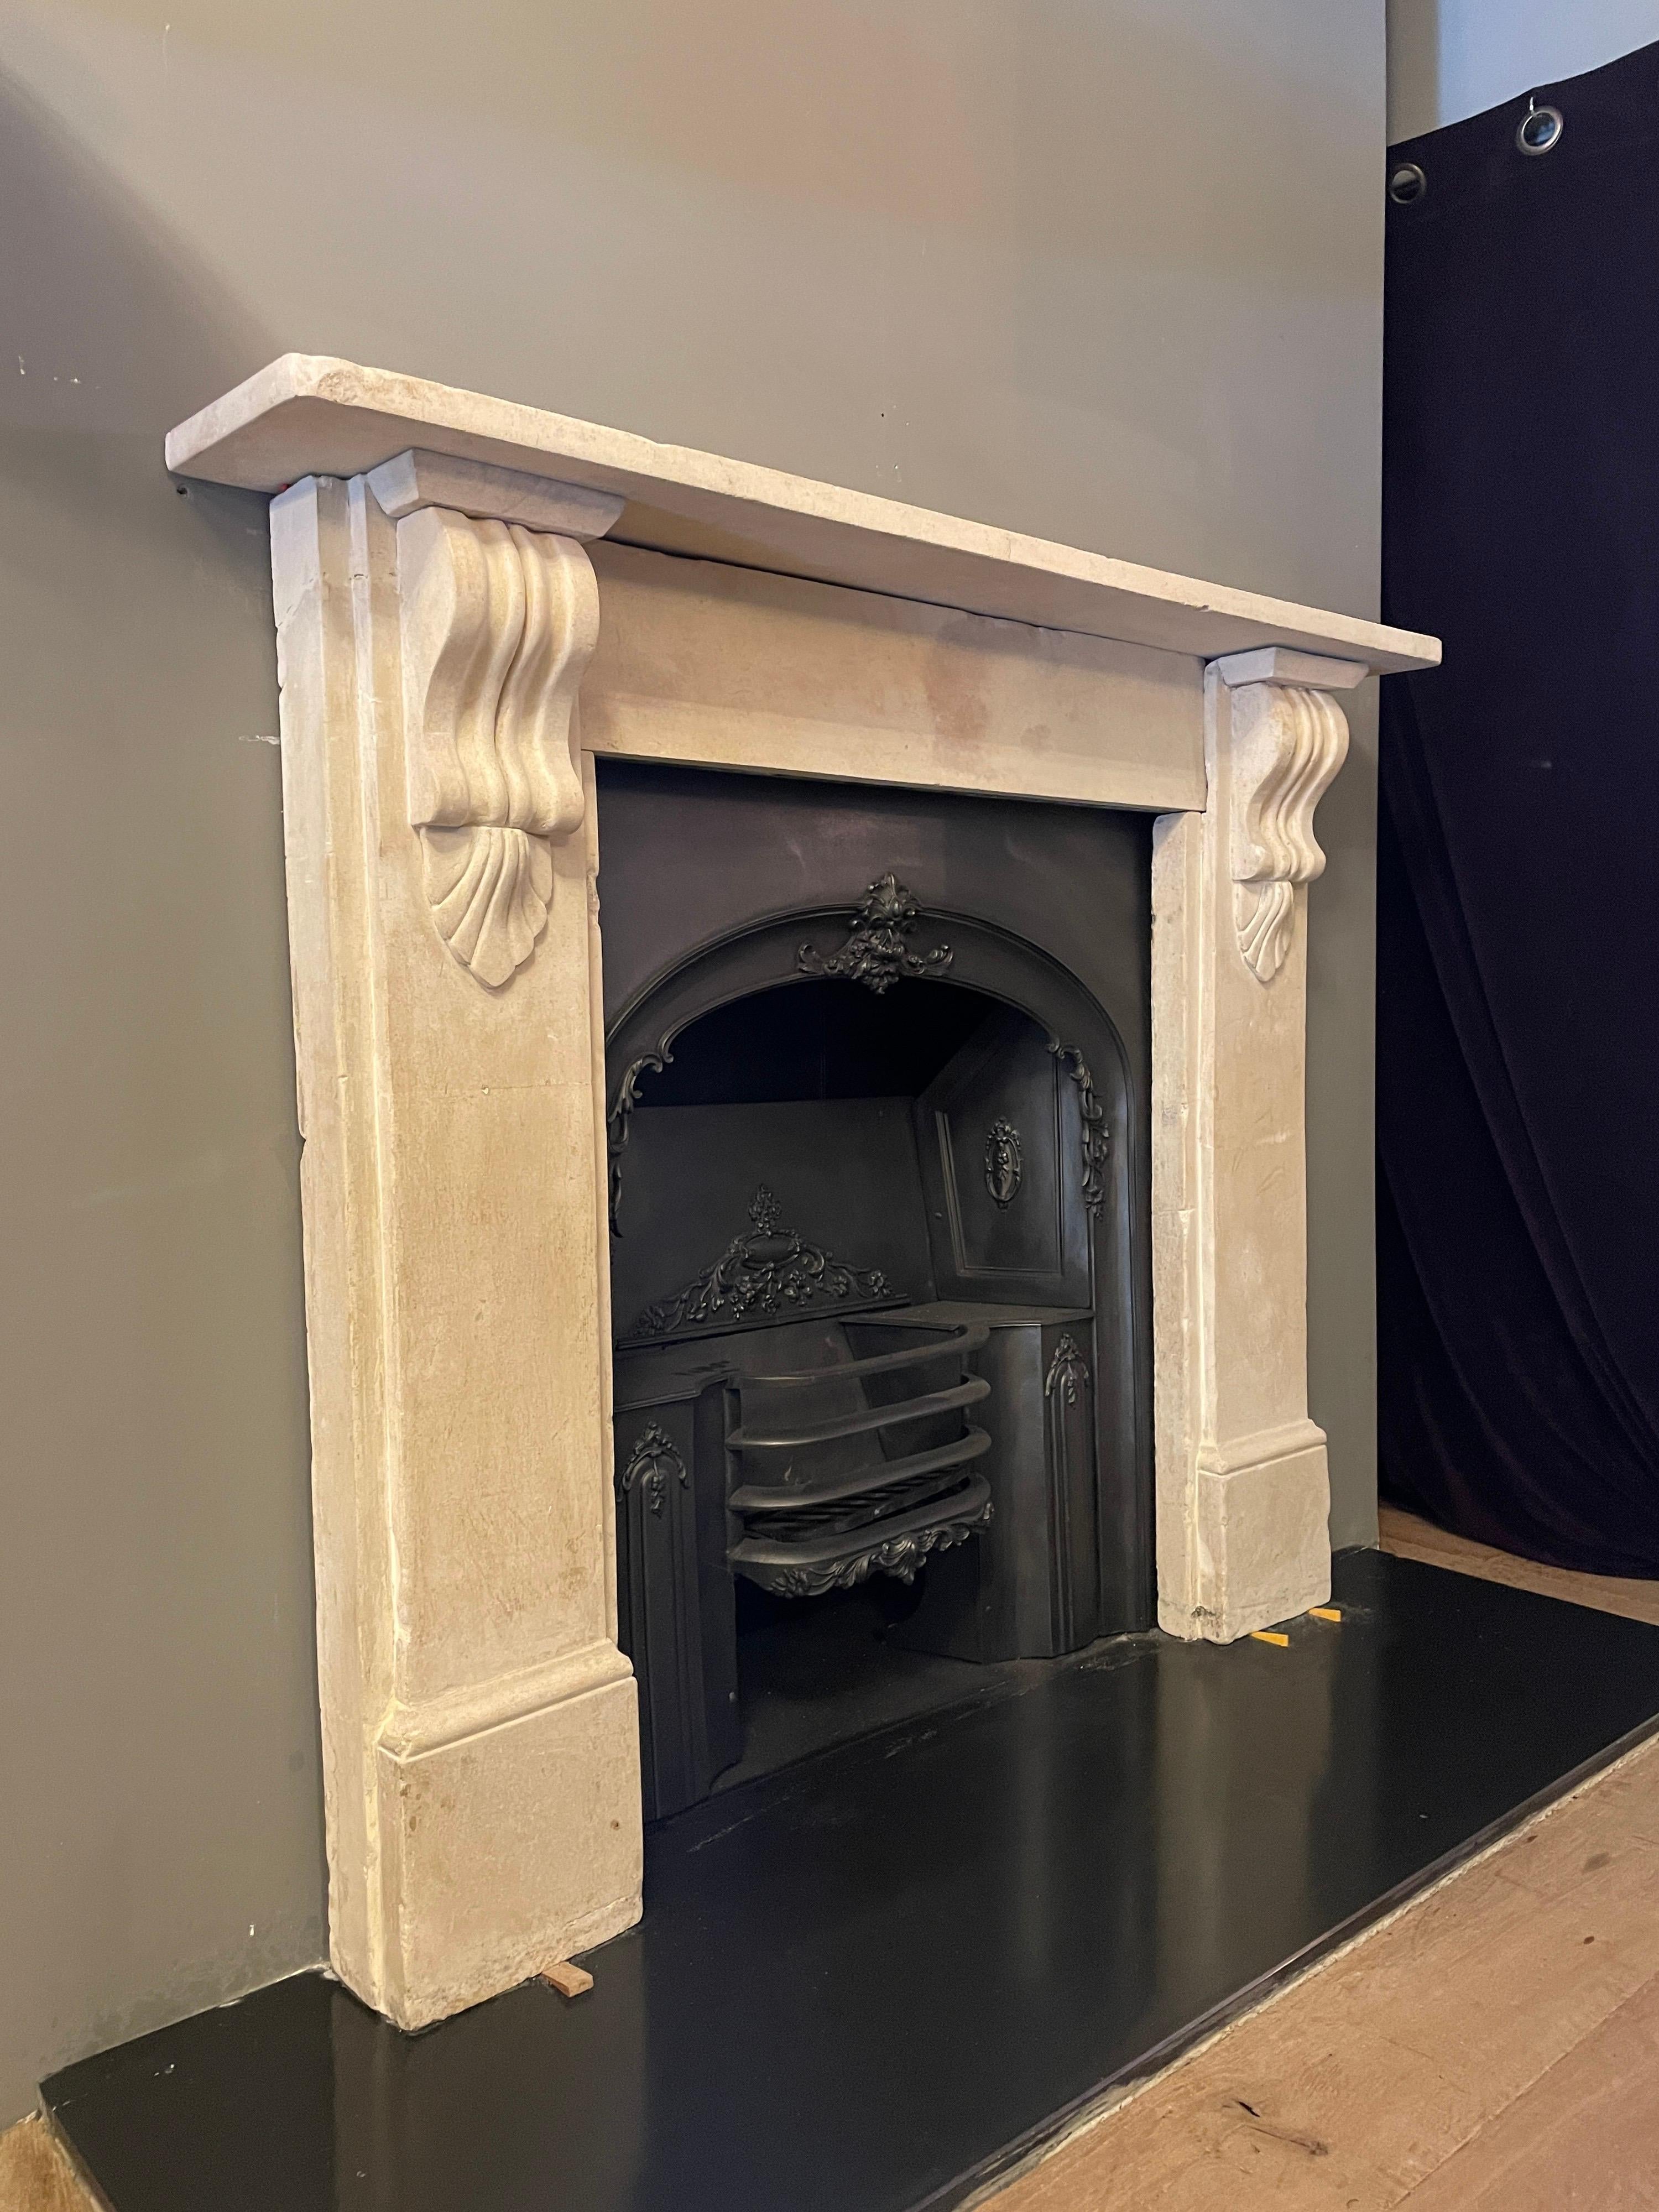 A typical Victorian style fireplace in English Bathstone, with plain jambs and frieze and carved corbel brackets with shell decoration. Gently restored to retain its rusticity

English, Circa 1880 

Opening size :

79cm W x 95cm H.